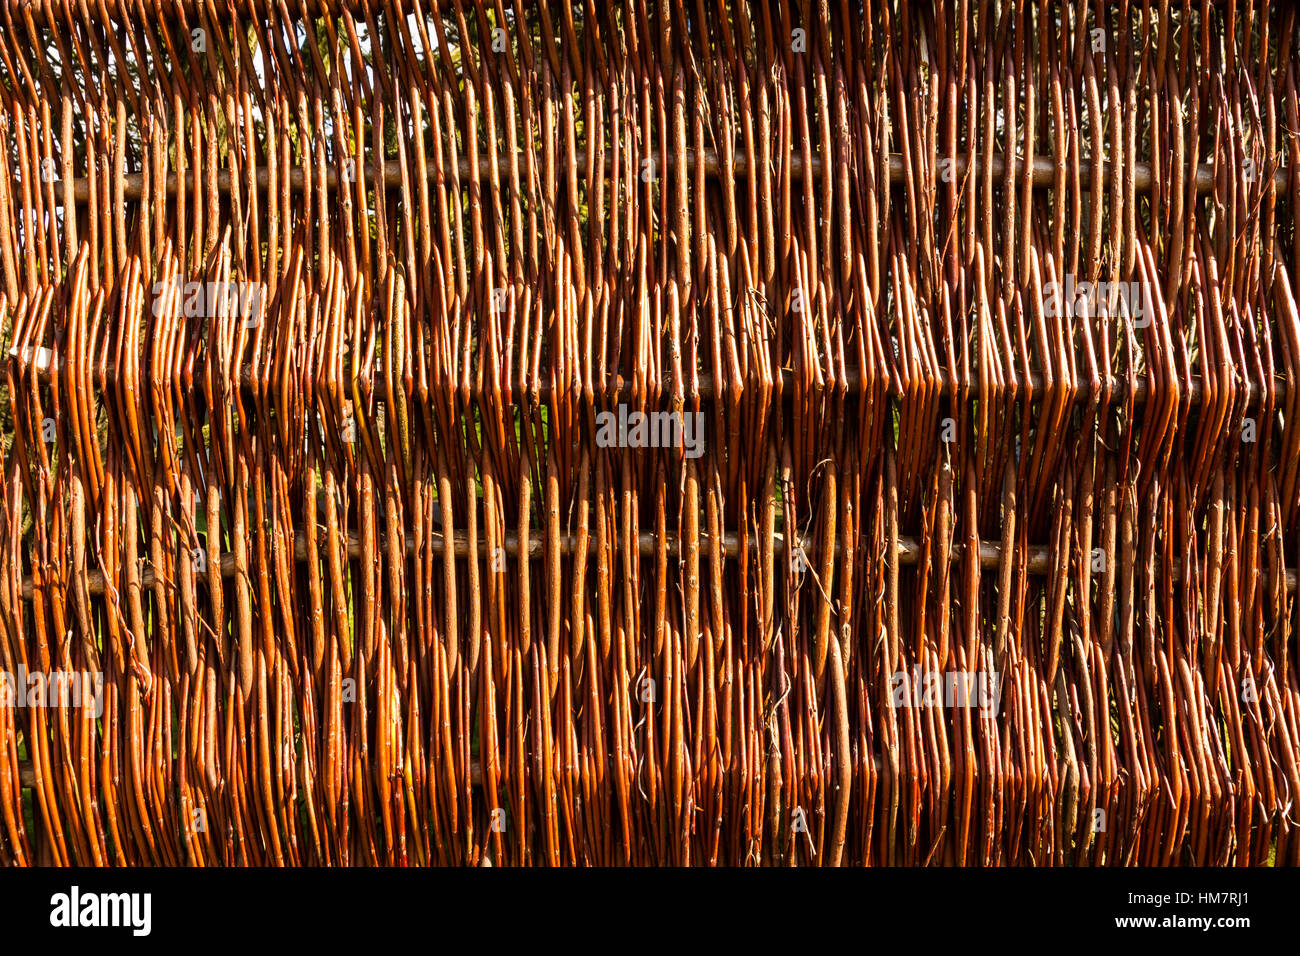 Detail of a new wicker fence no nails Stock Photo